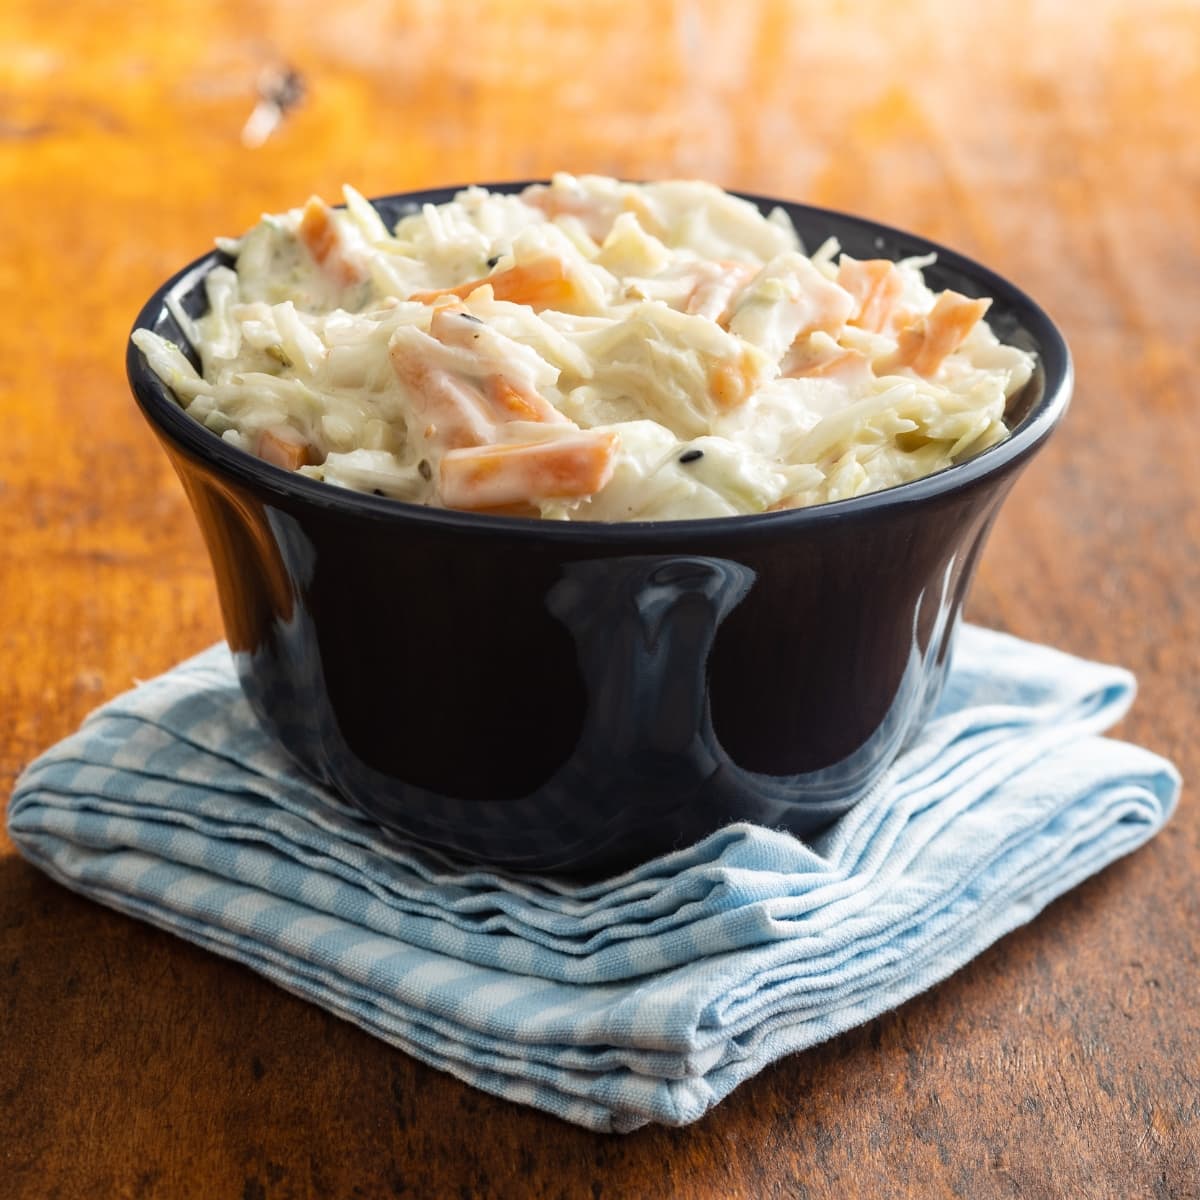 Creamy Coleslaw with Carrots and Cabbage on a Blue Napkin